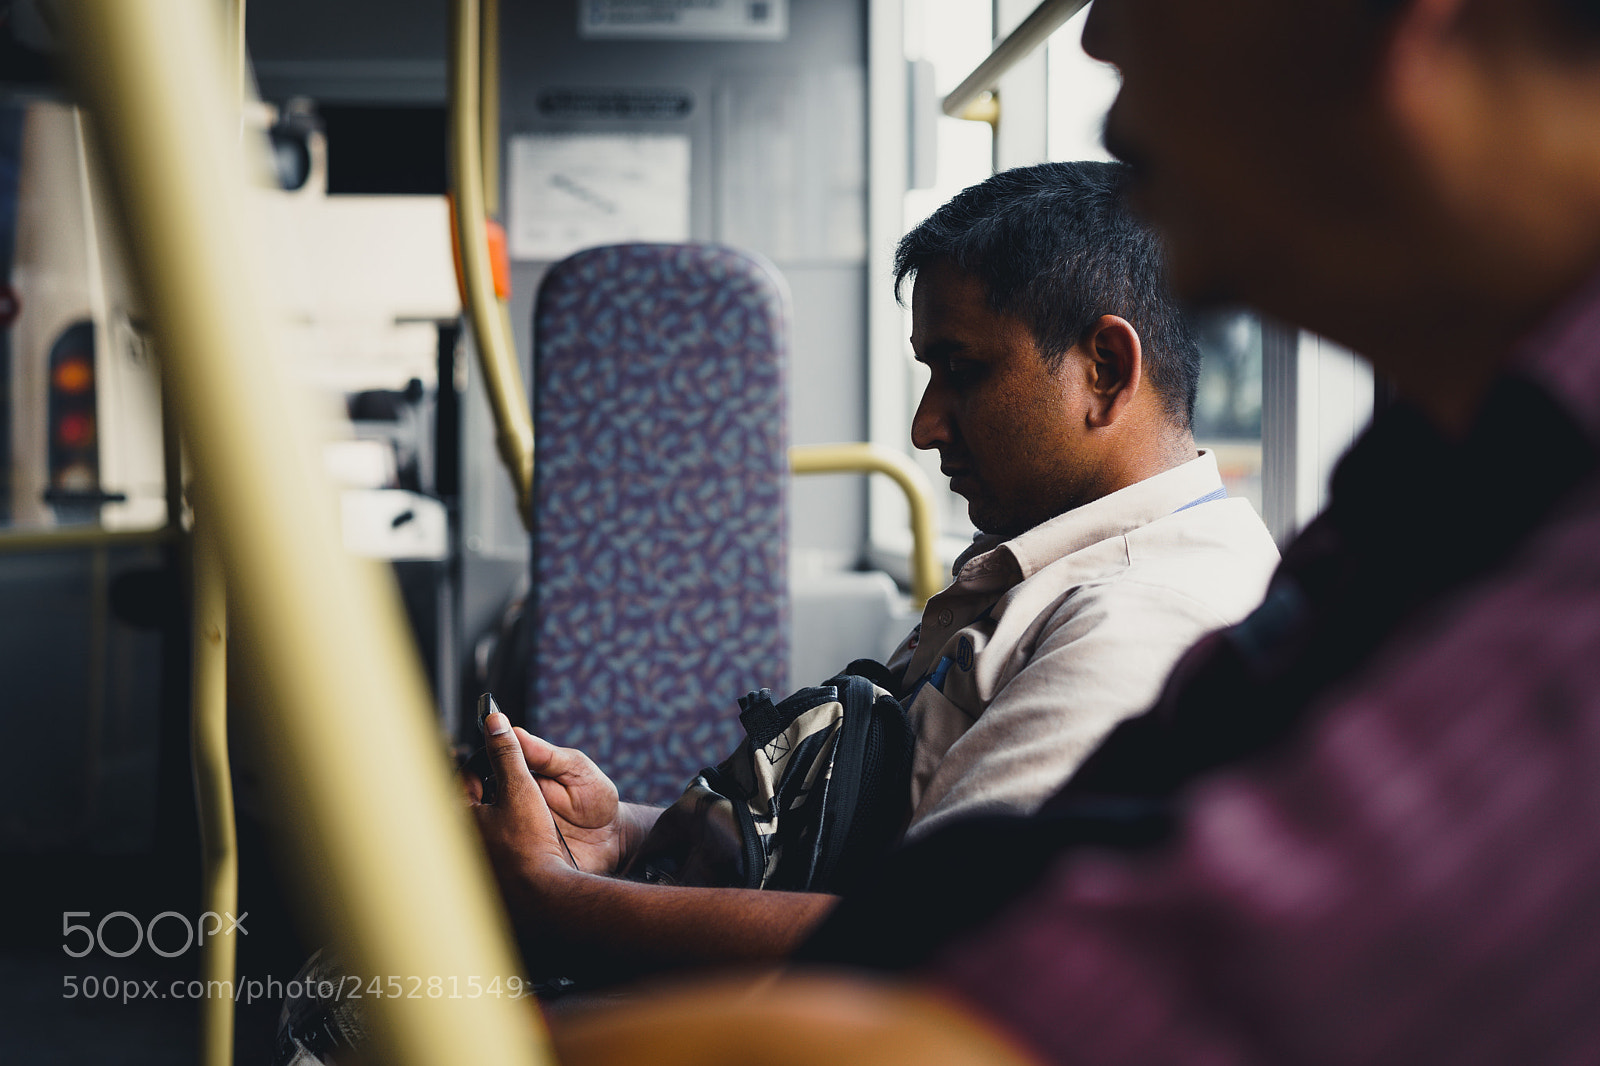 Sony a7 II sample photo. Man in public transport photography